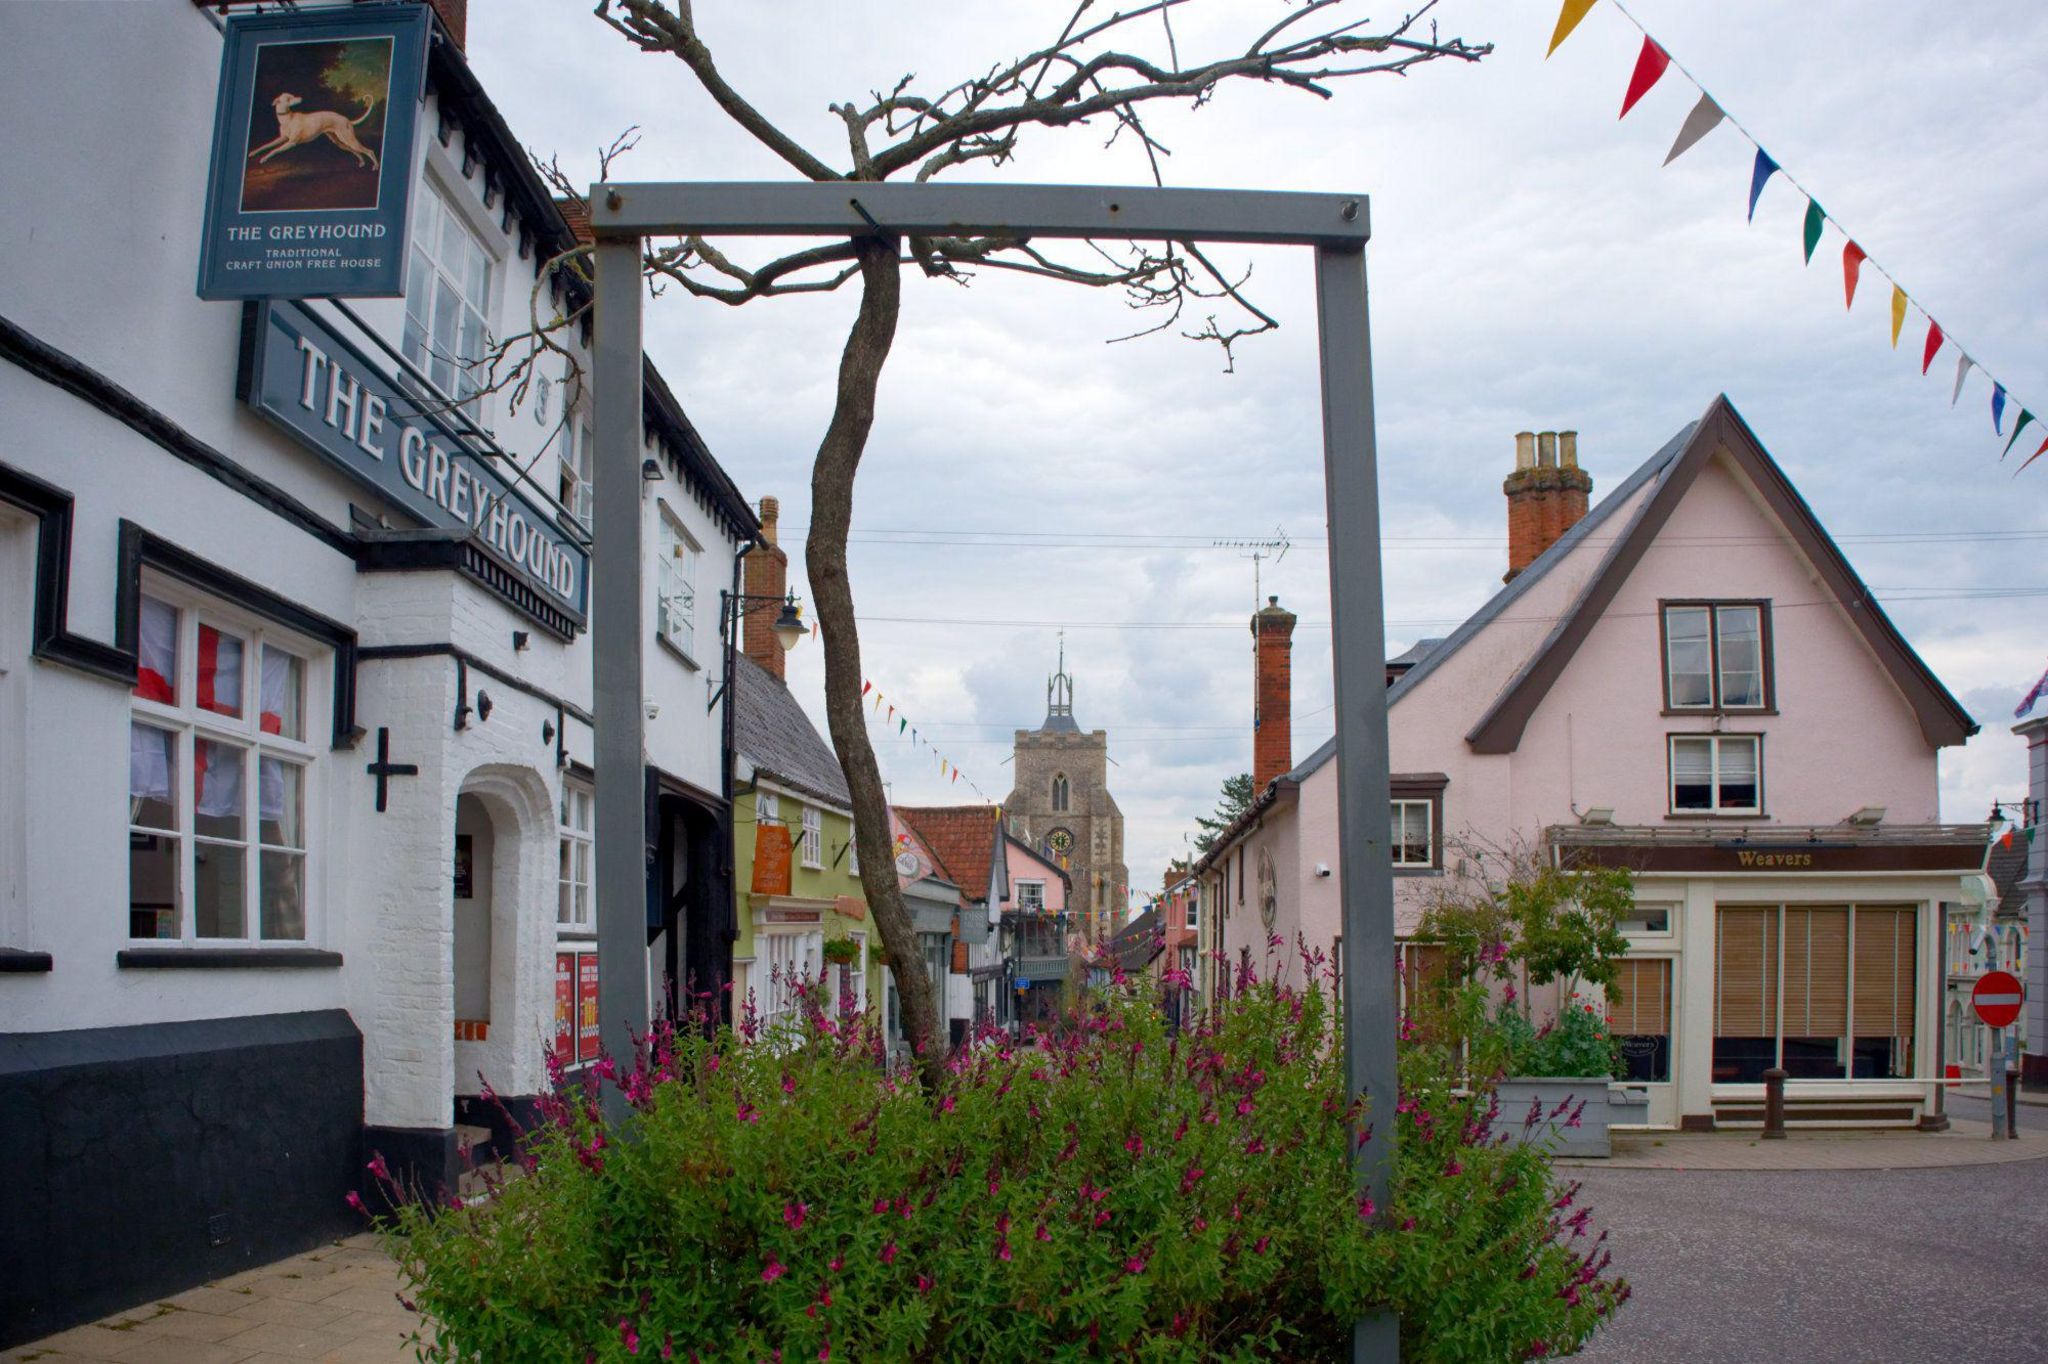 Street in Diss with showing buildings painted pink and white, with bunting hanging above the street